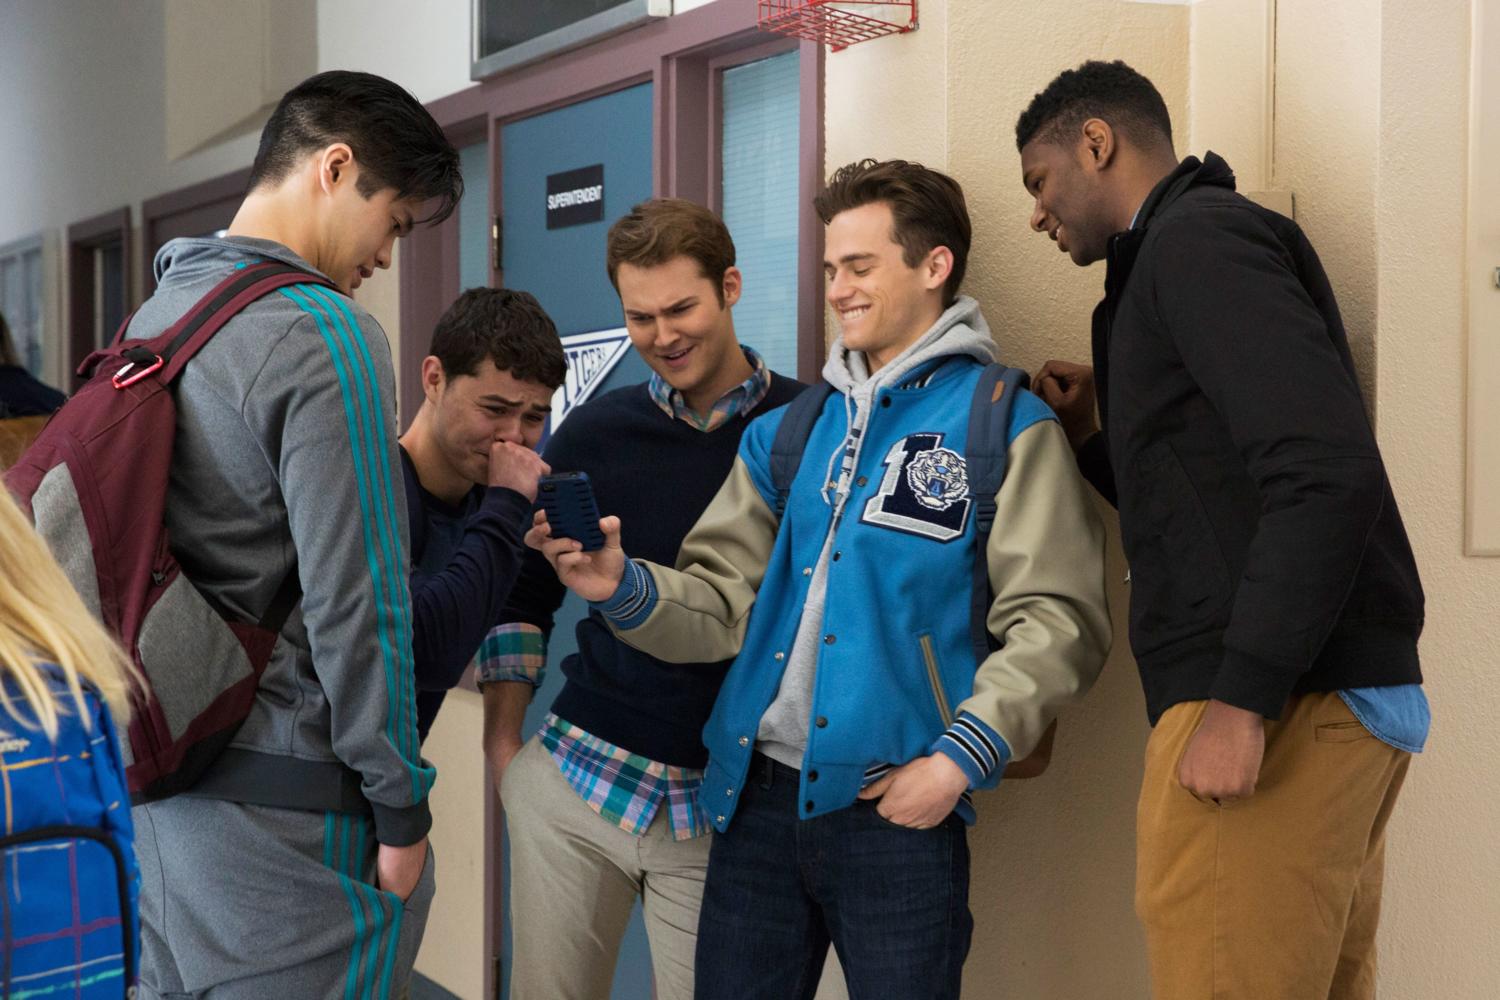 The jocks in 13 Reasons Why are portrayed very negatively.